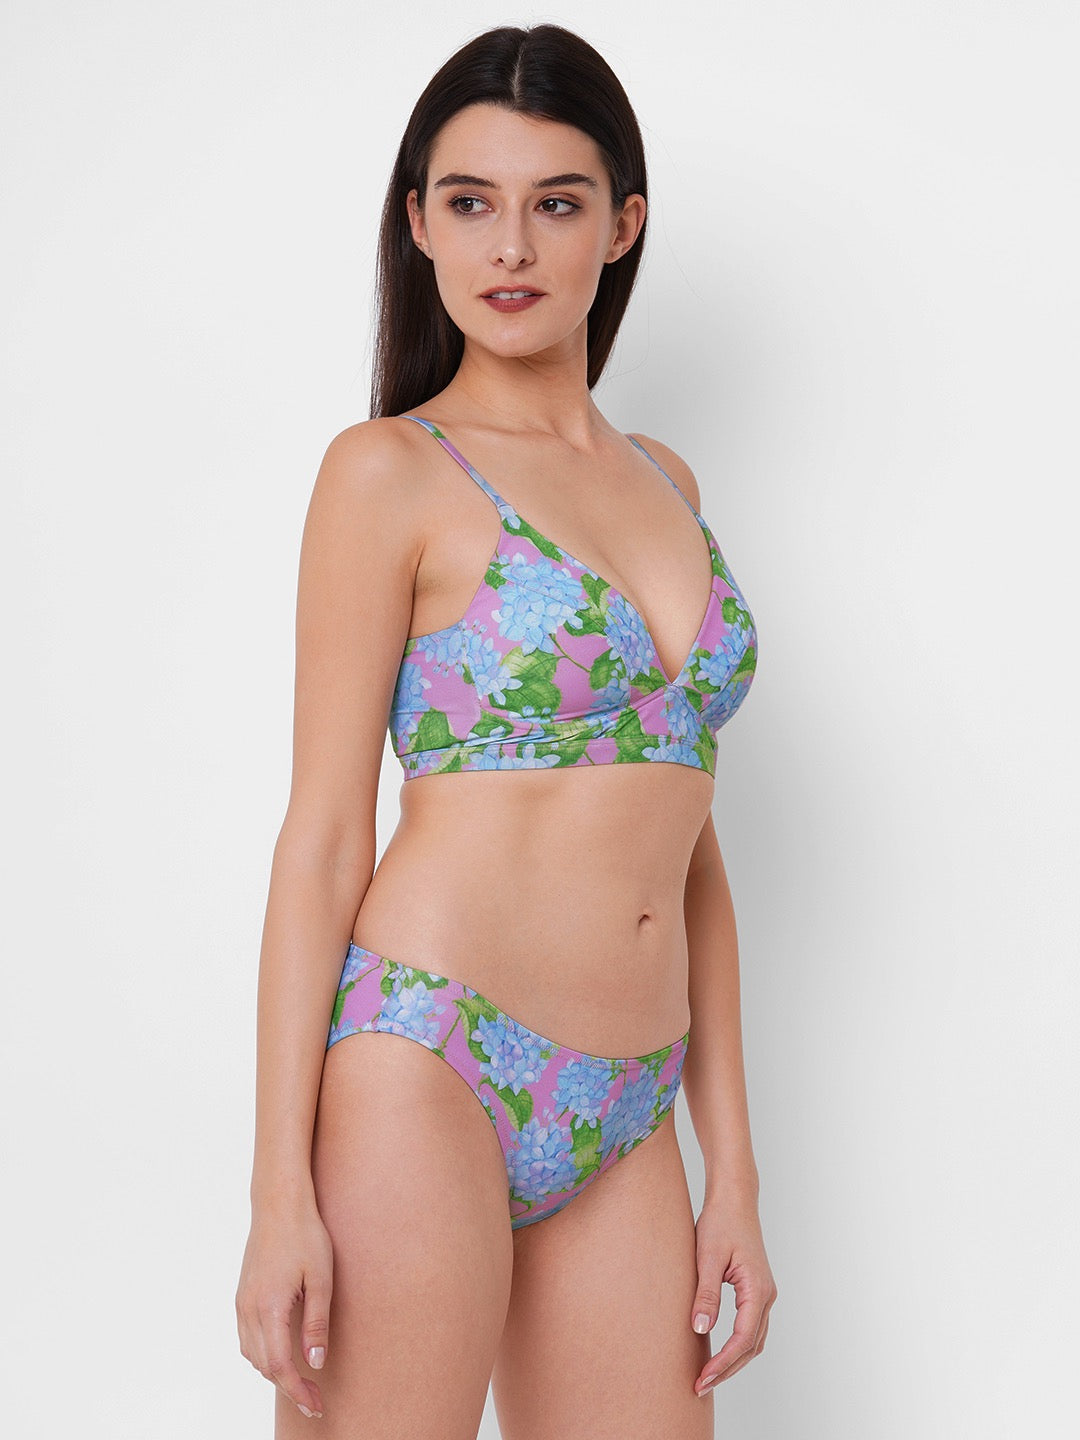 woman is wearing a two piece bikini set with a blue hydrangea print on a pink background